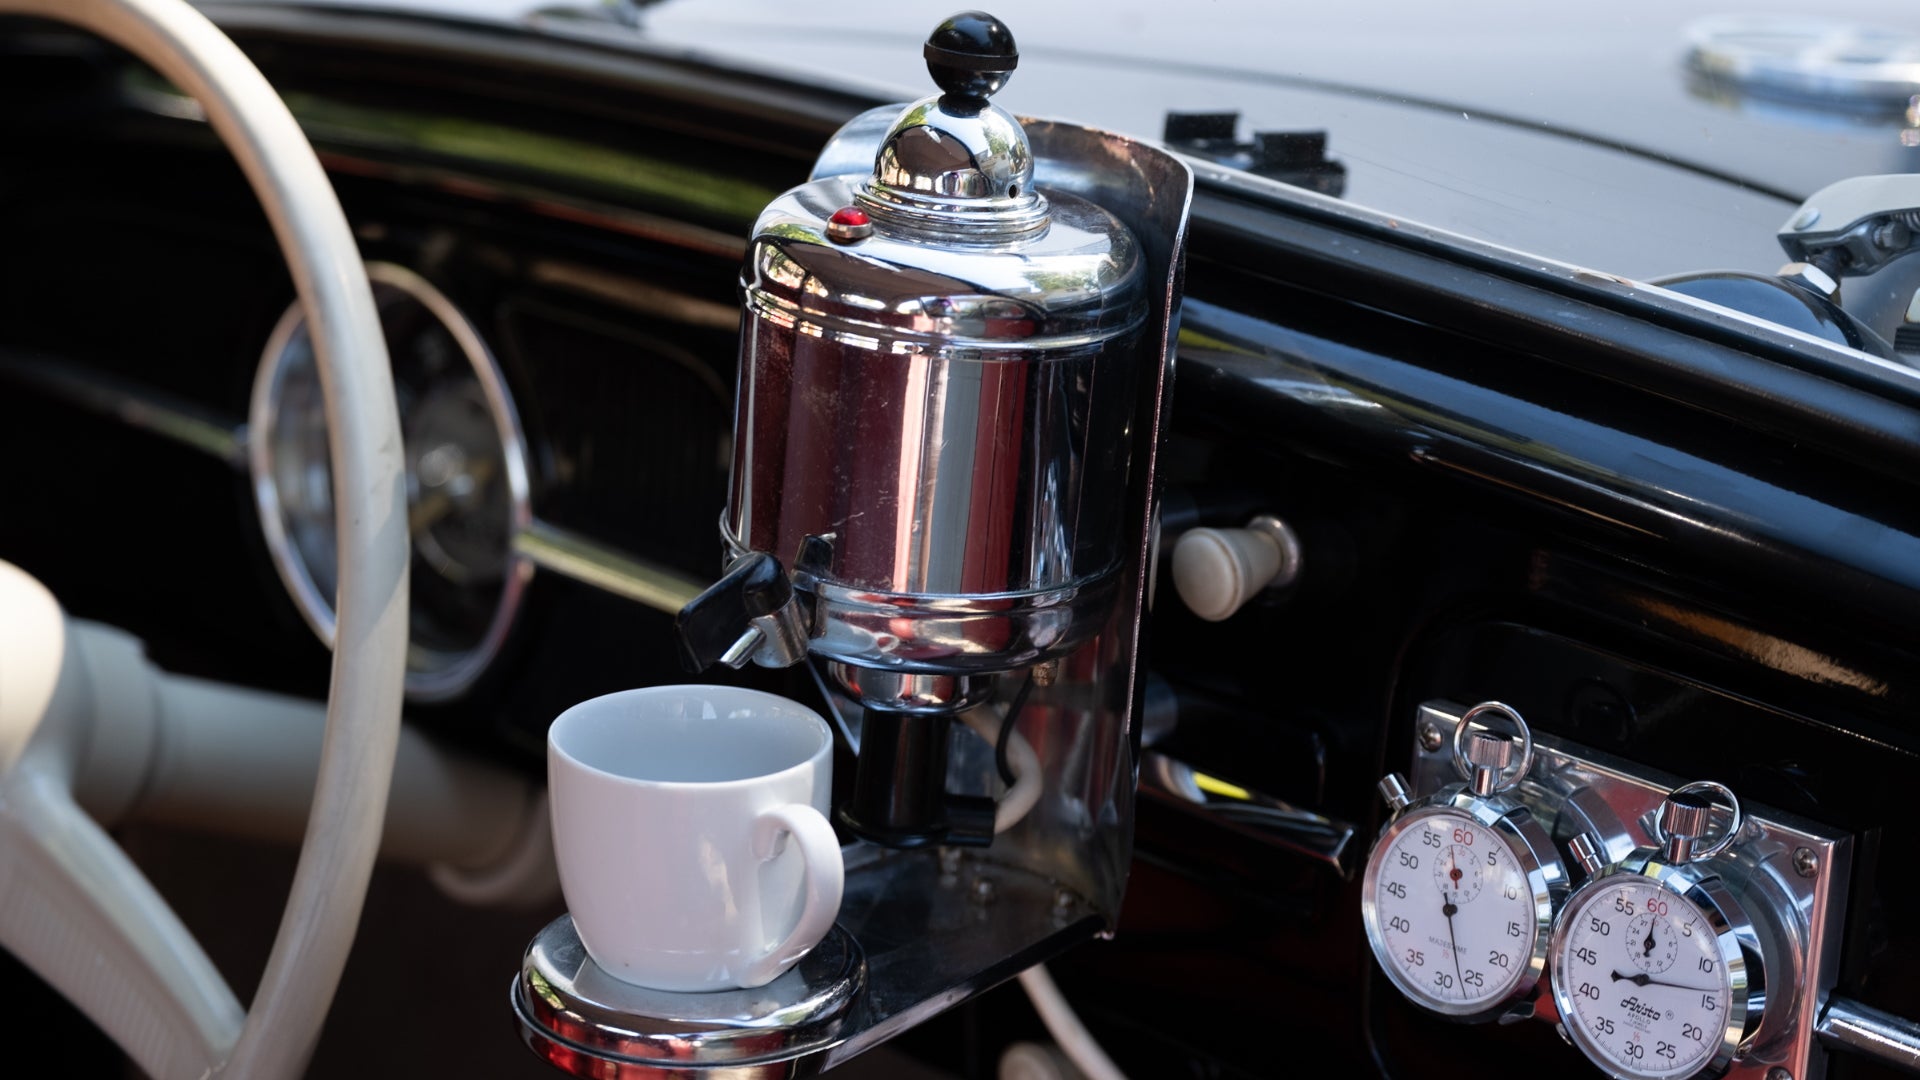 This Dash-Mounted Coffee Maker Is Likely the Rarest Volkswagen